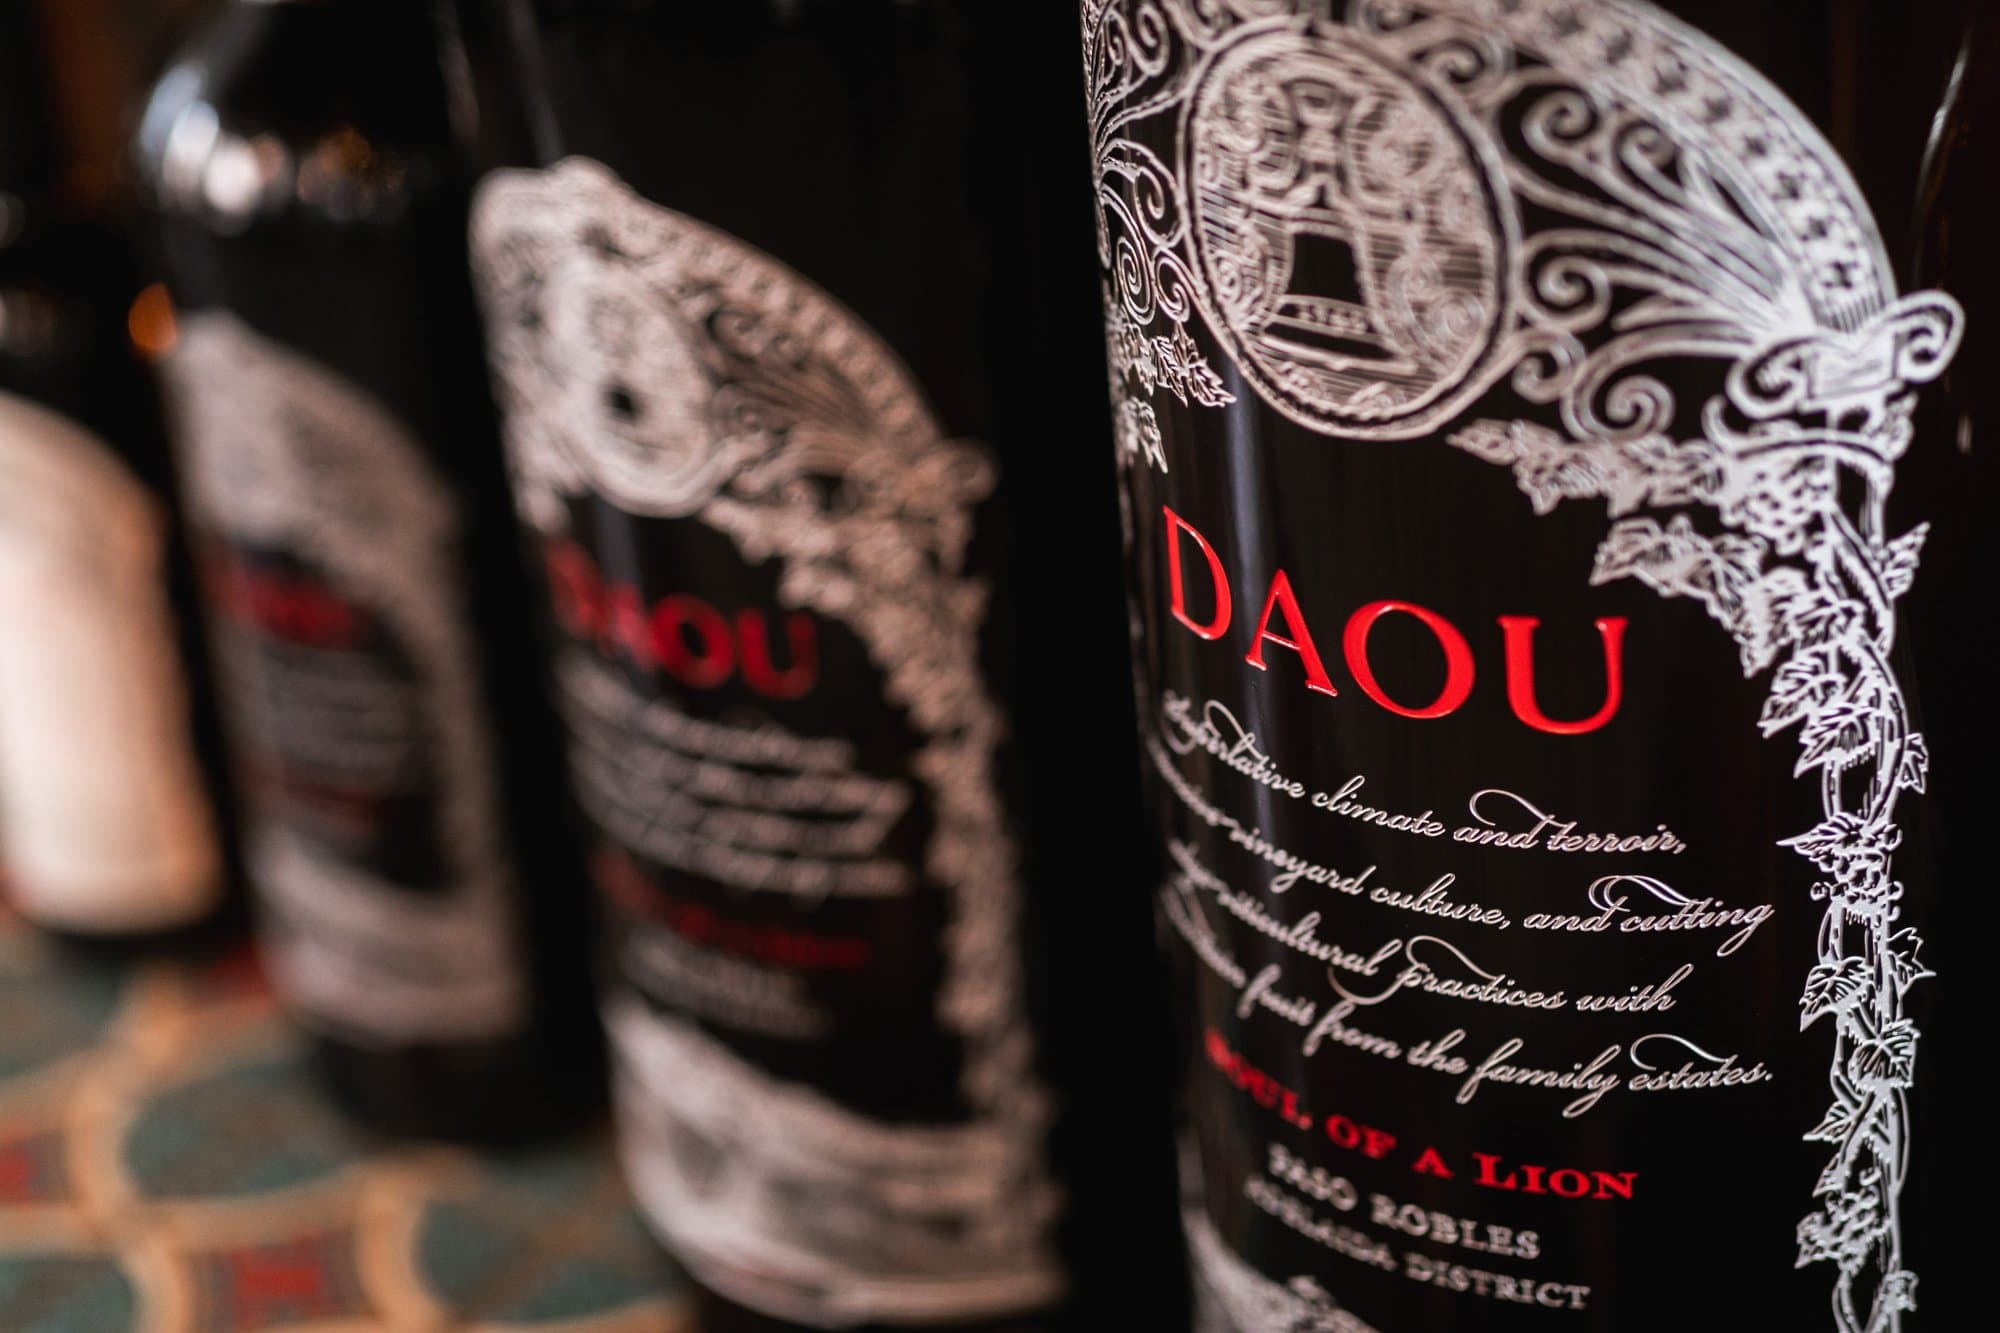 A row of large format bottles of Soul of a Lion